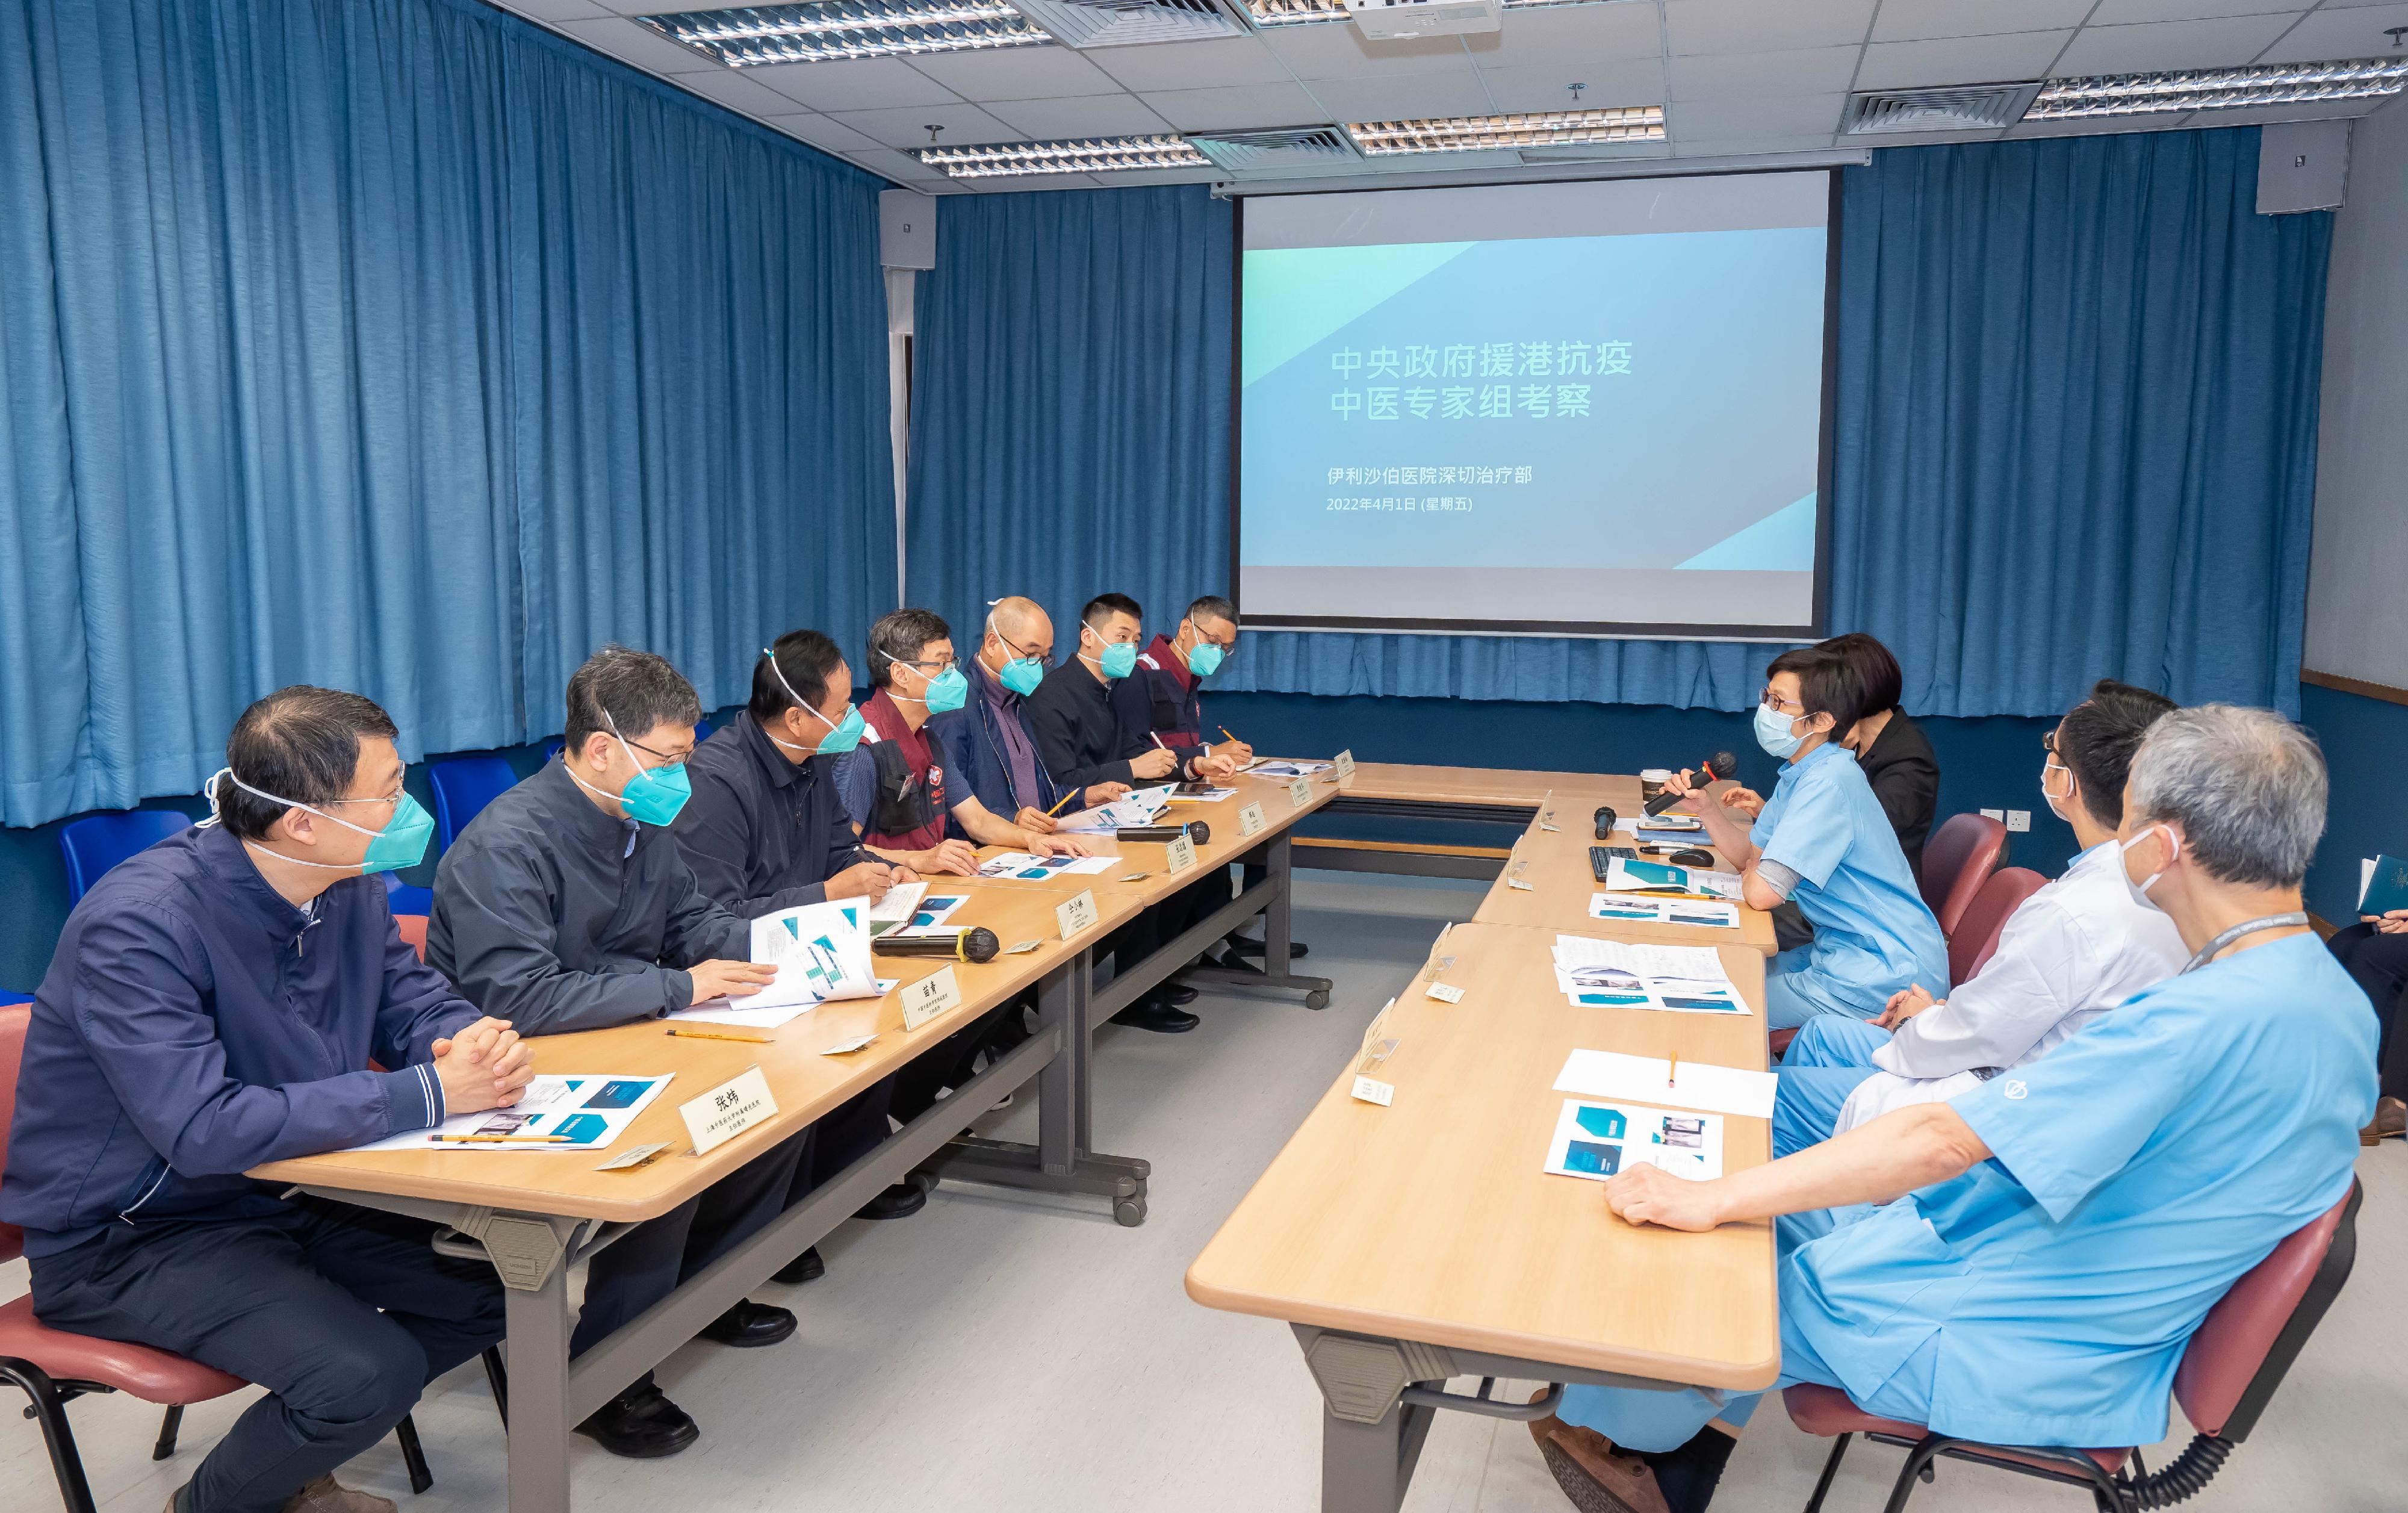 The Mainland Chinese medicine expert group of the Central Authorities today (April 1) visited the Queen Elizabeth Hospital to exchange with healthcare workers and to understand the operation of designated hospital.